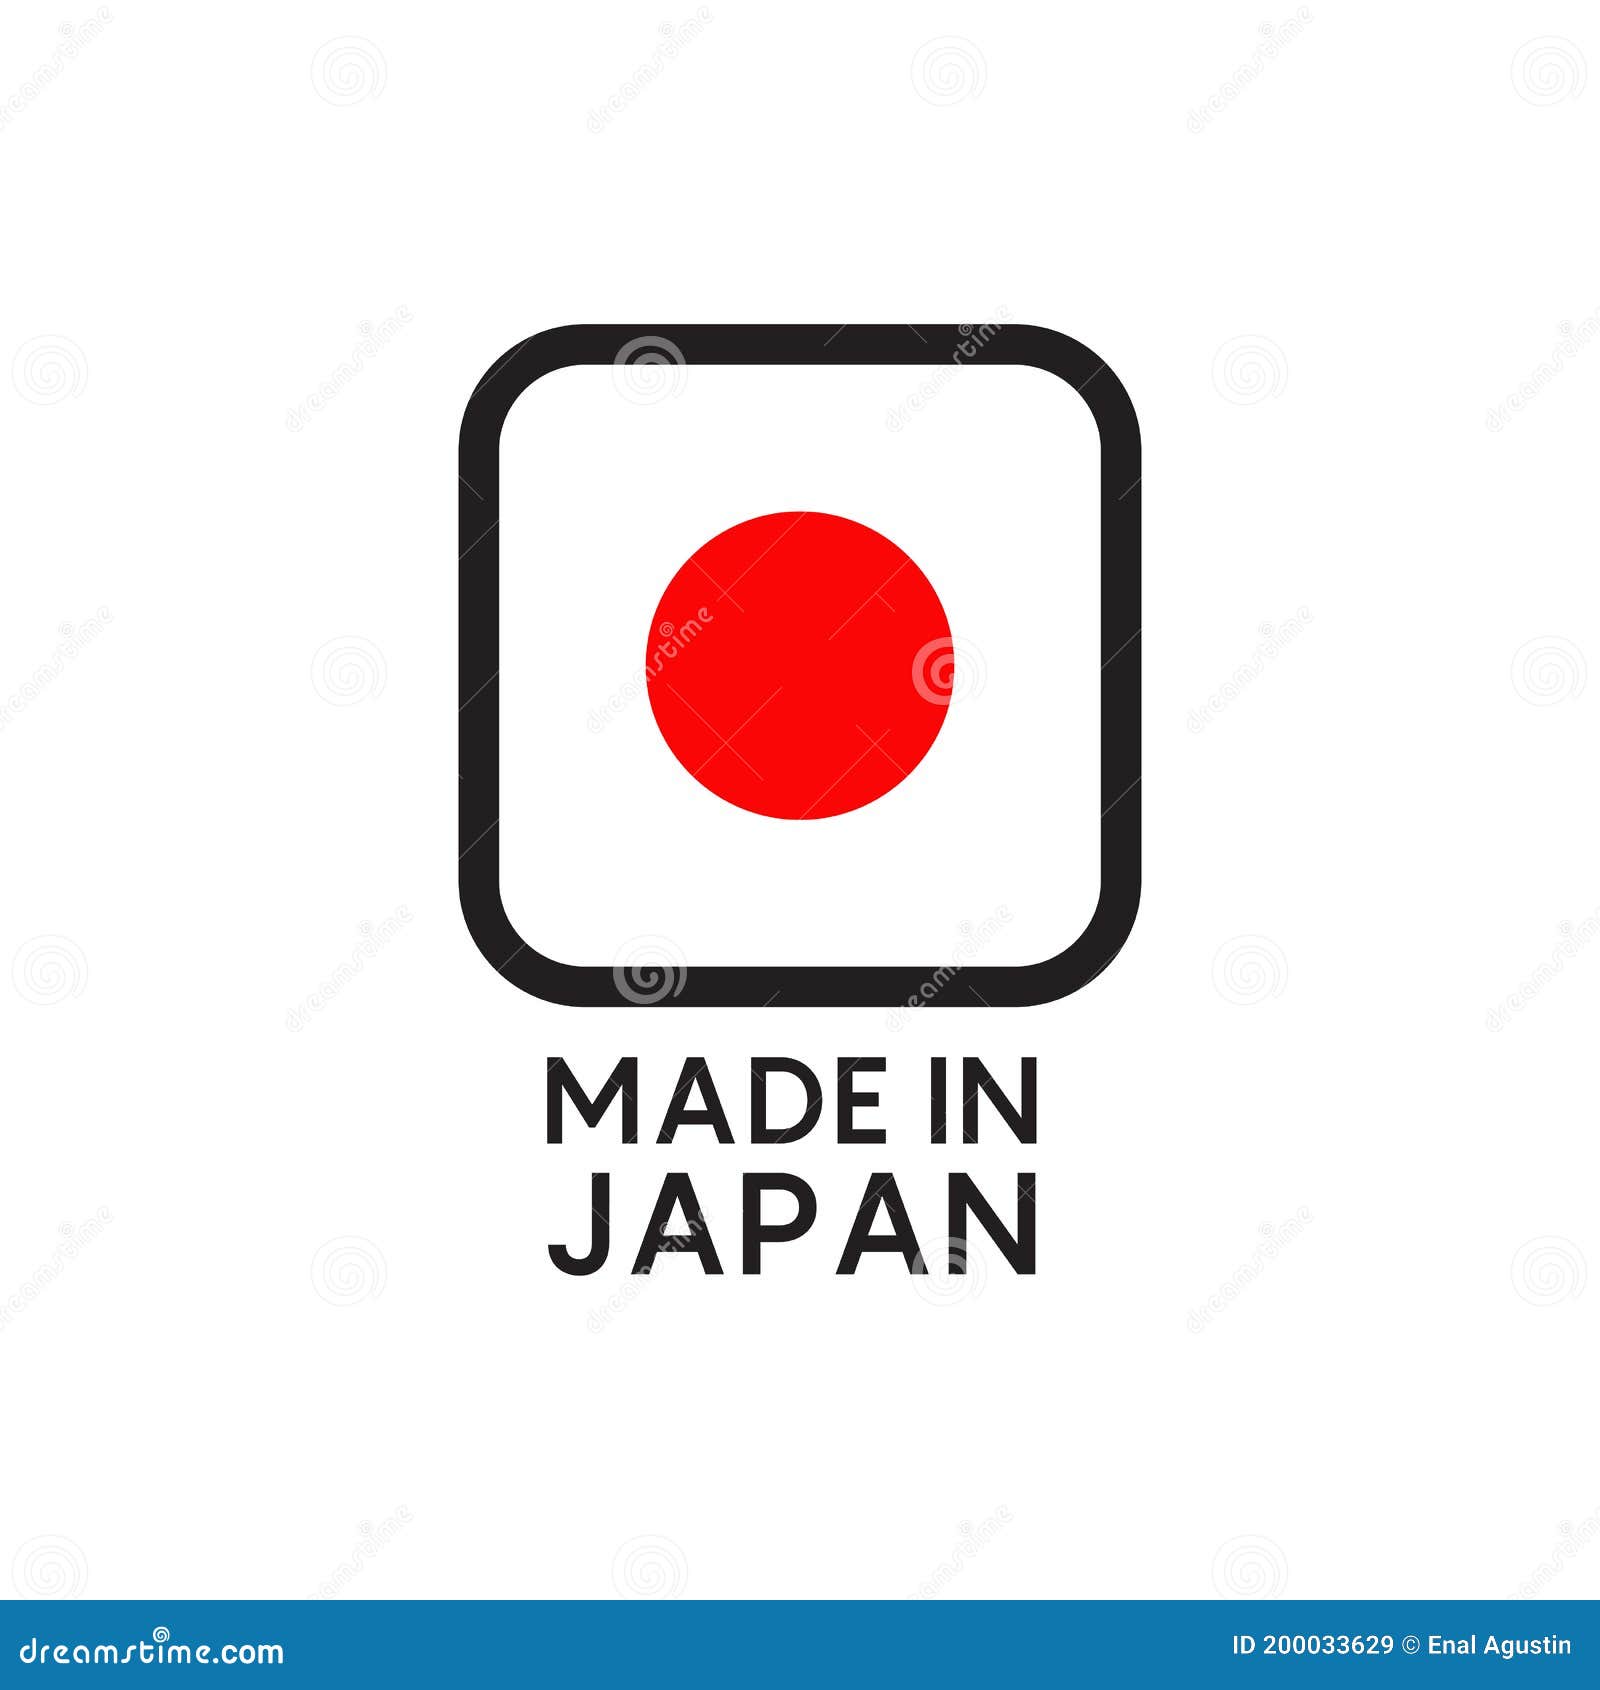 Made in Japan!